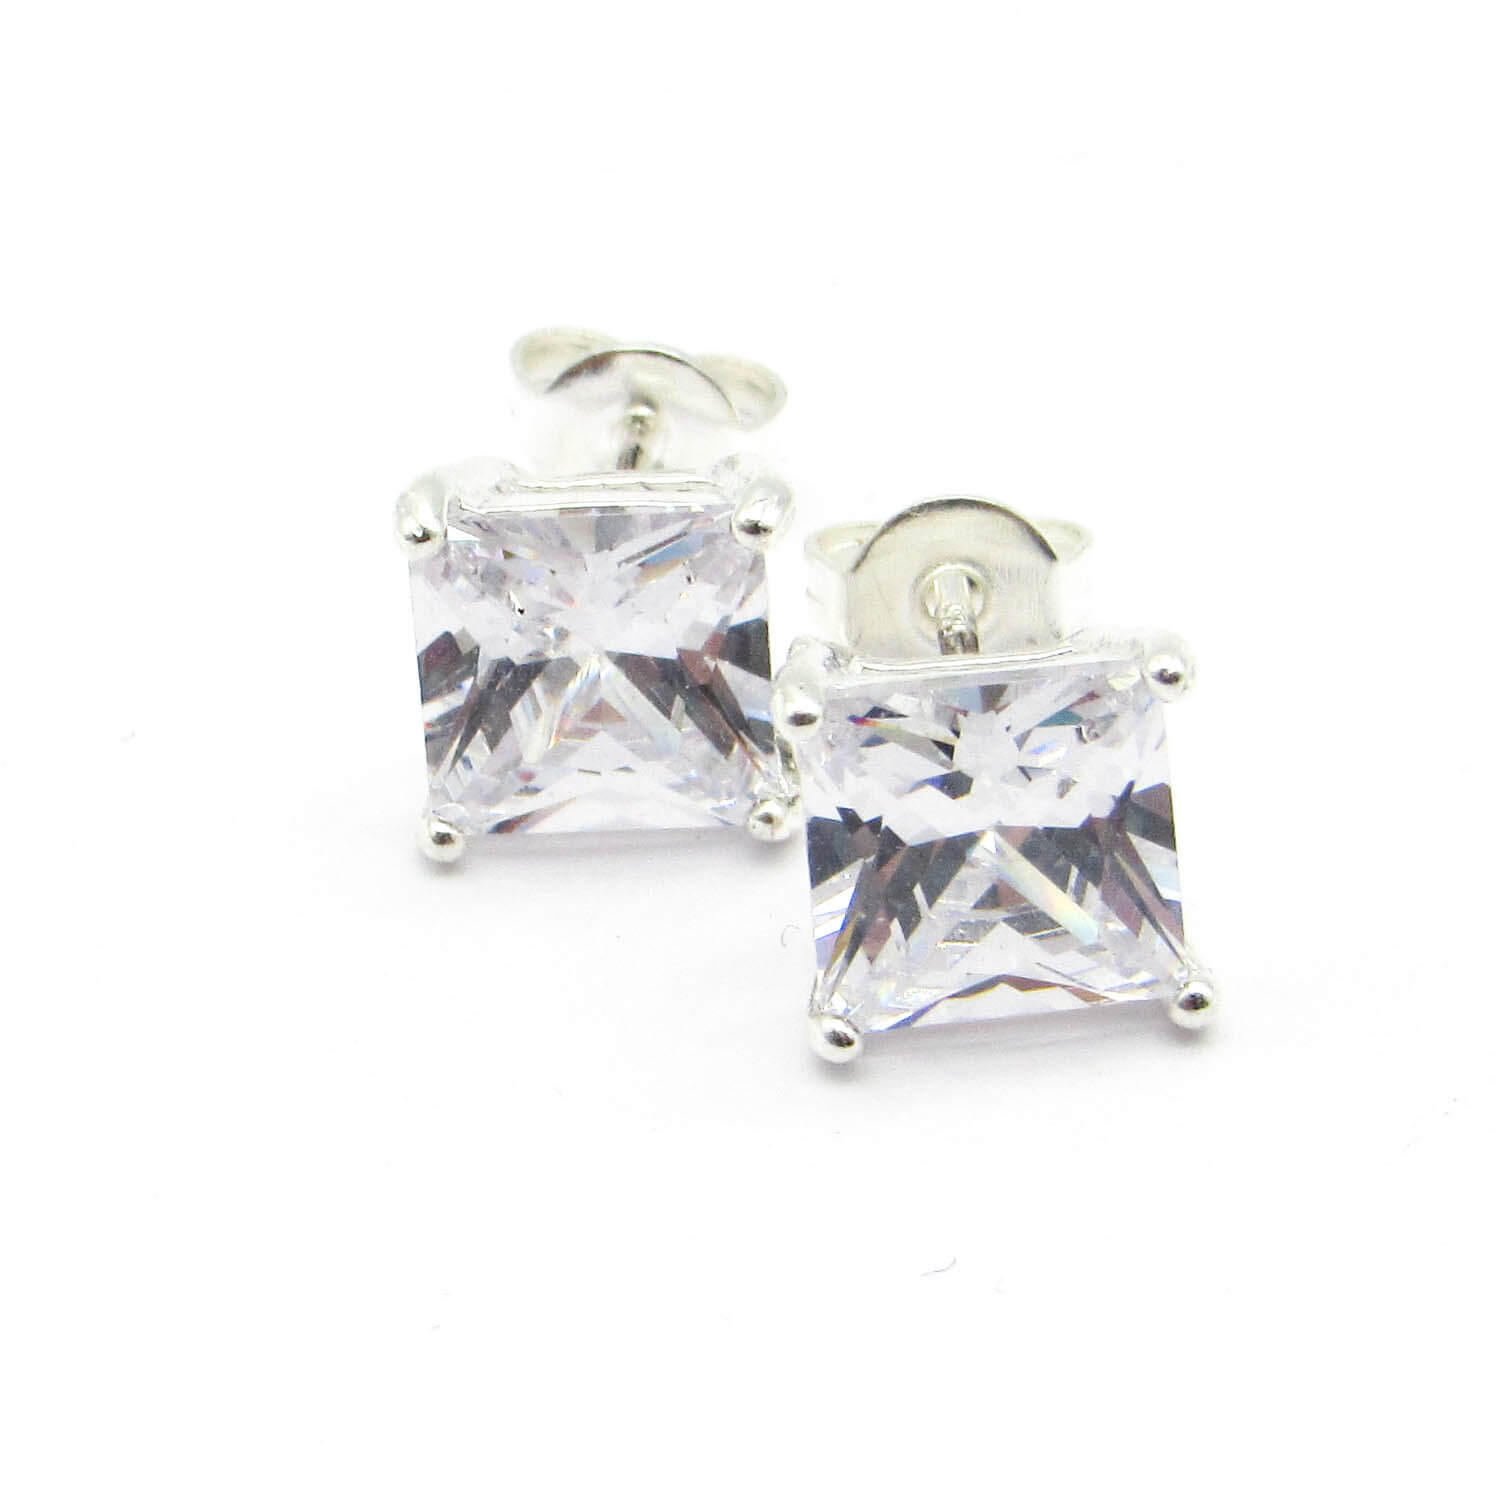 AROS CUBIC 7x7MM GRIFAS /PLATA